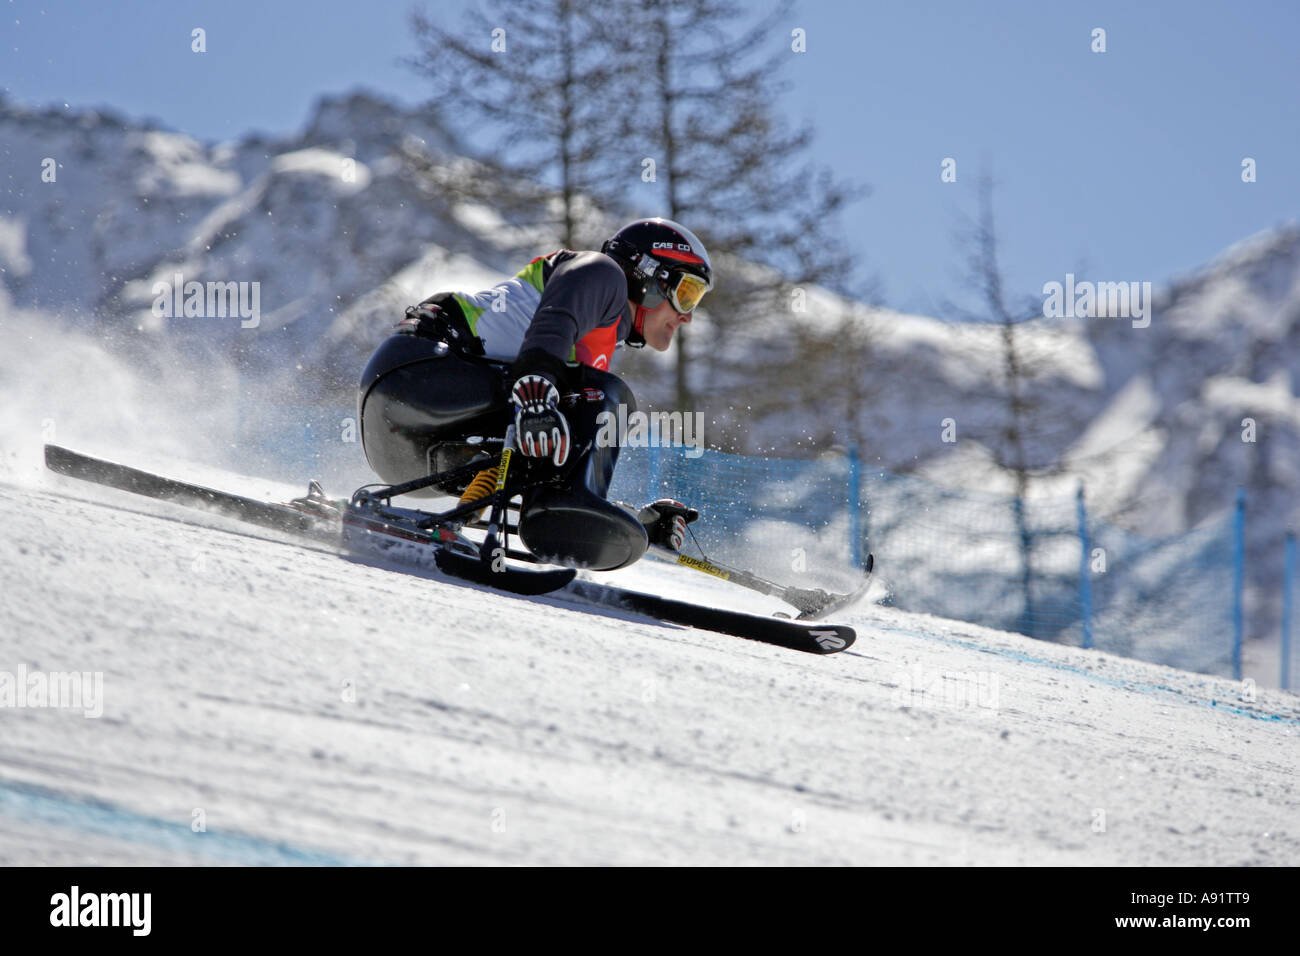 Martin Braxenthaler LW10 2 of Germany in the Mens Alpine Skiing Super G Sitting competition Stock Photo